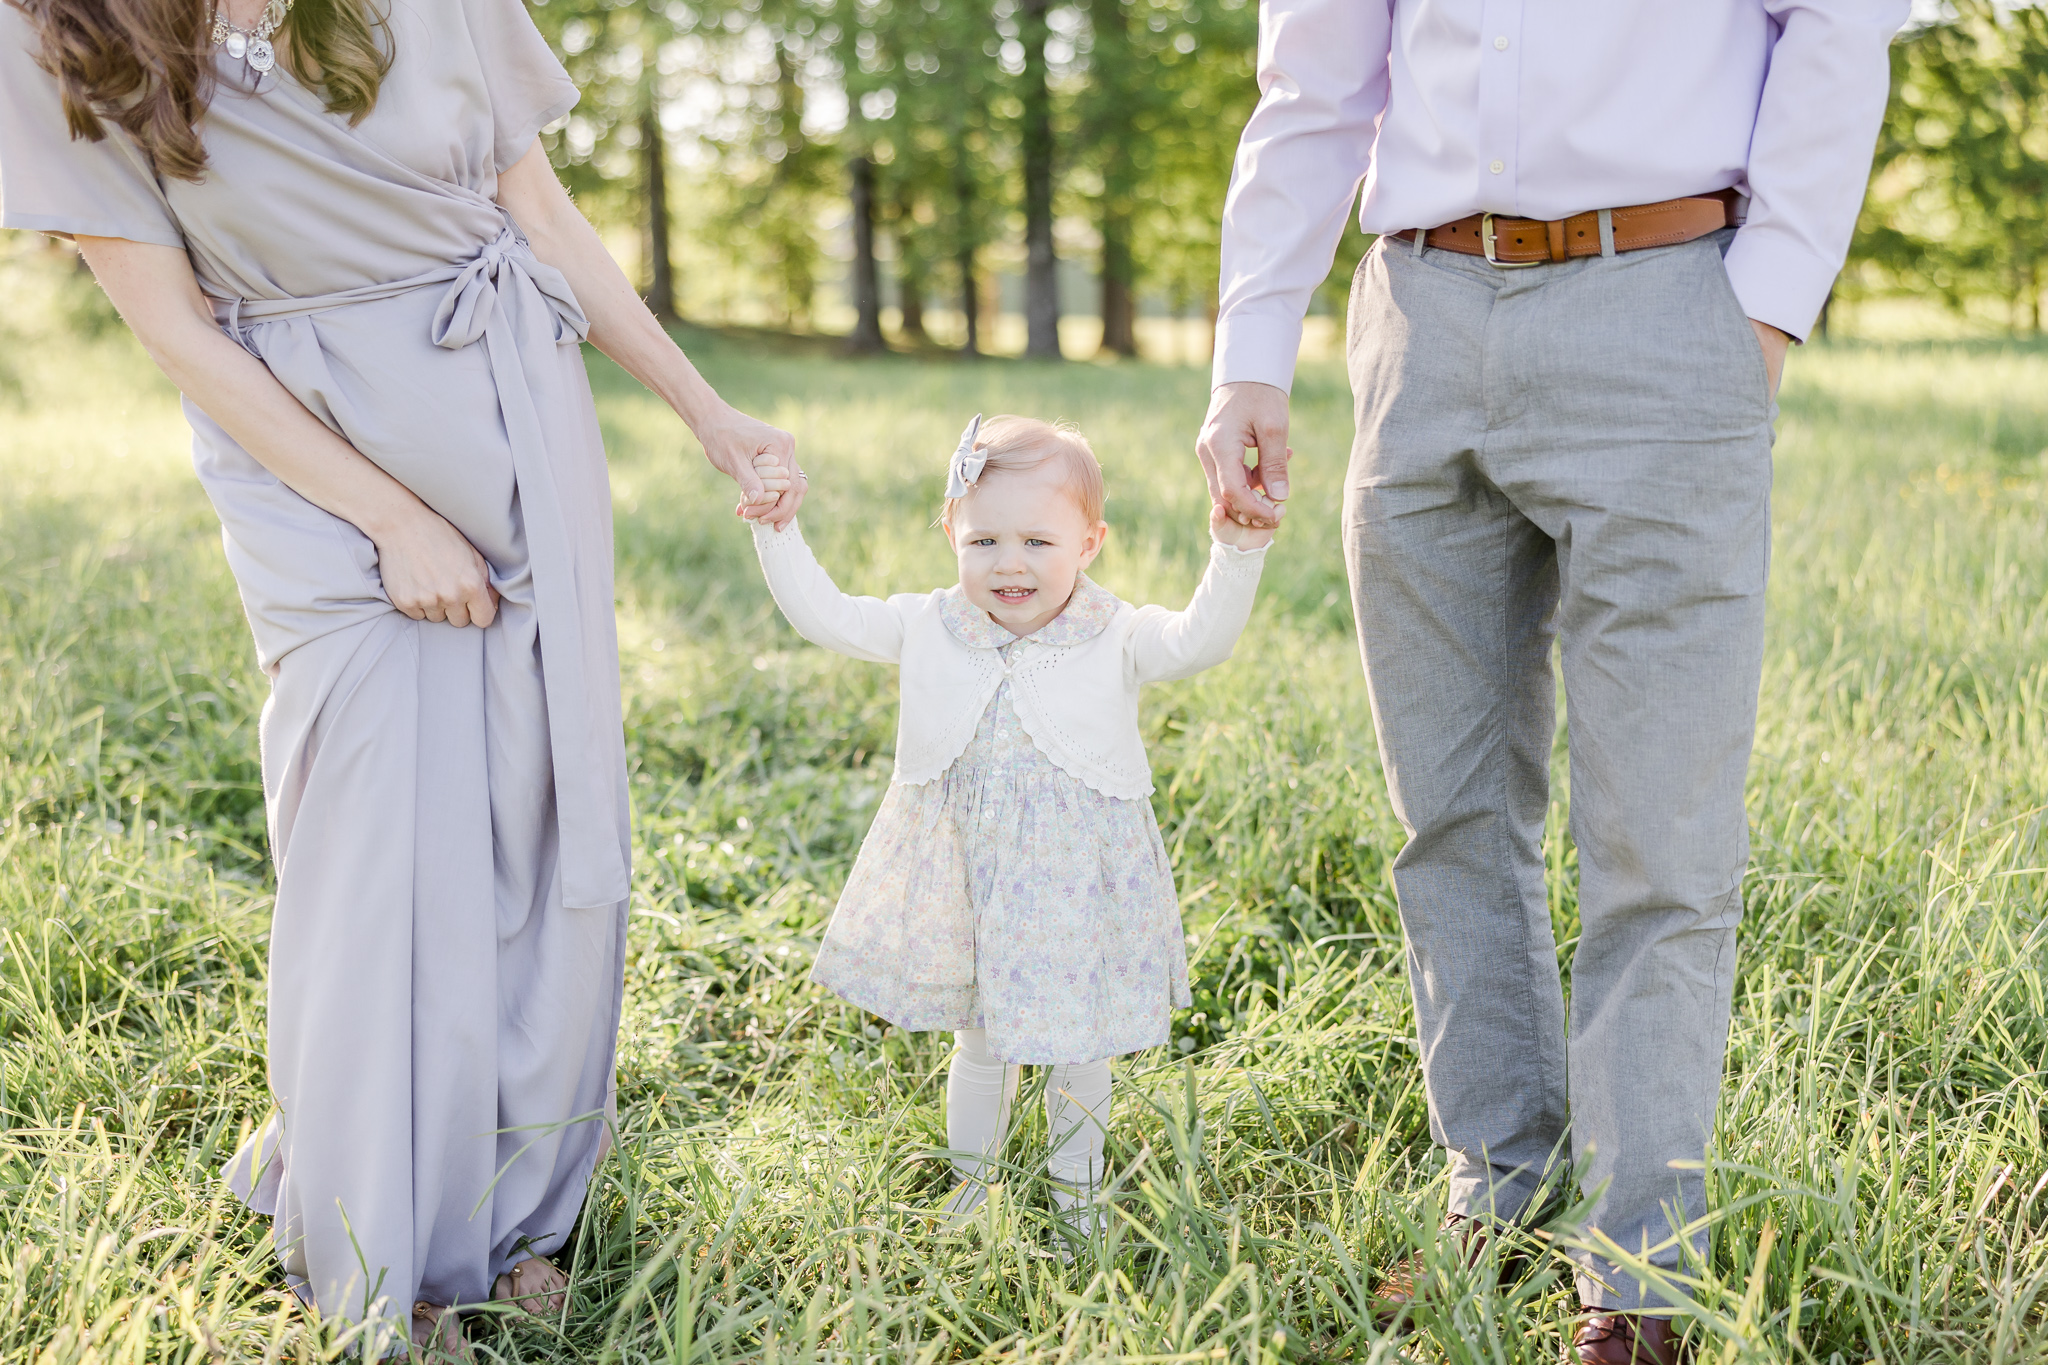 Two parents holding the hand of their toddler daughter in a grassy field.